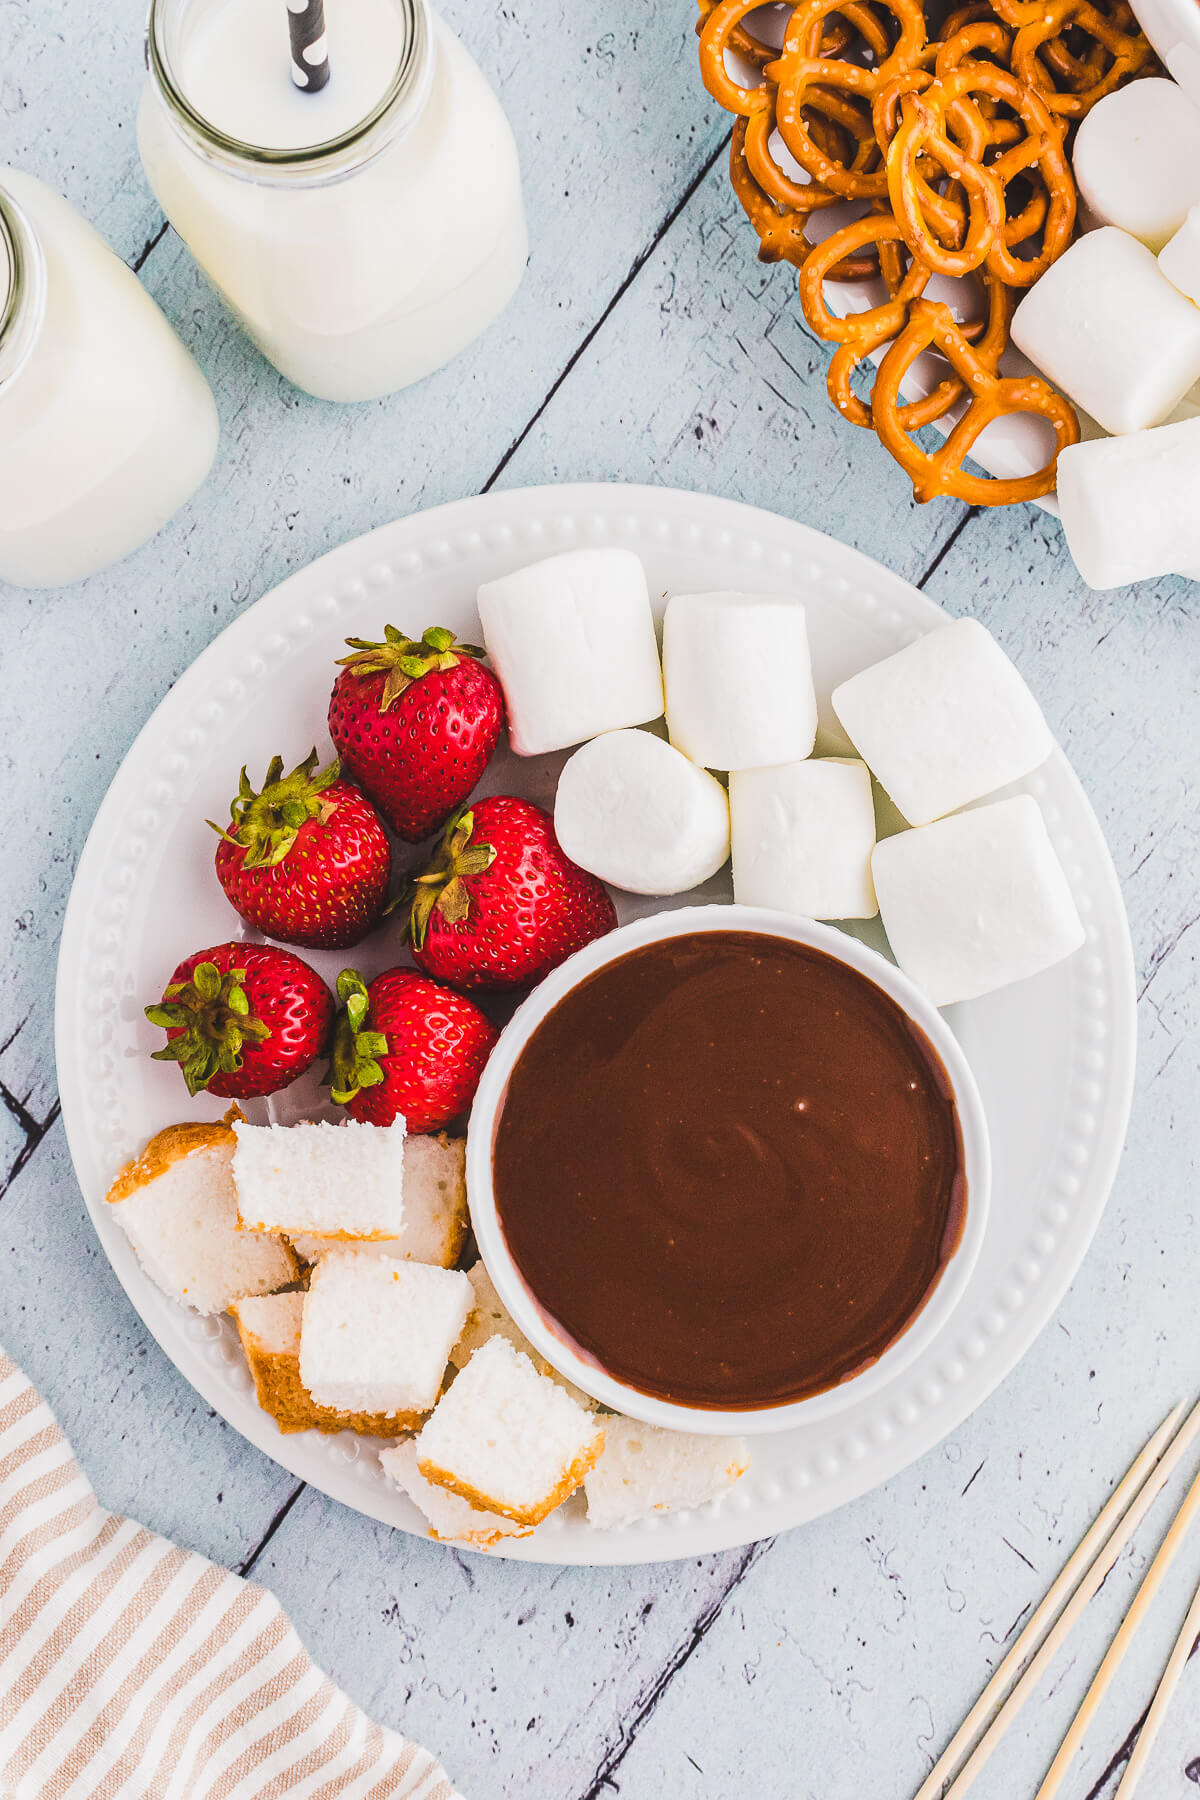 A dessert platter featuring a bowl of melted chocolate fondue surrounded by items for dipping.